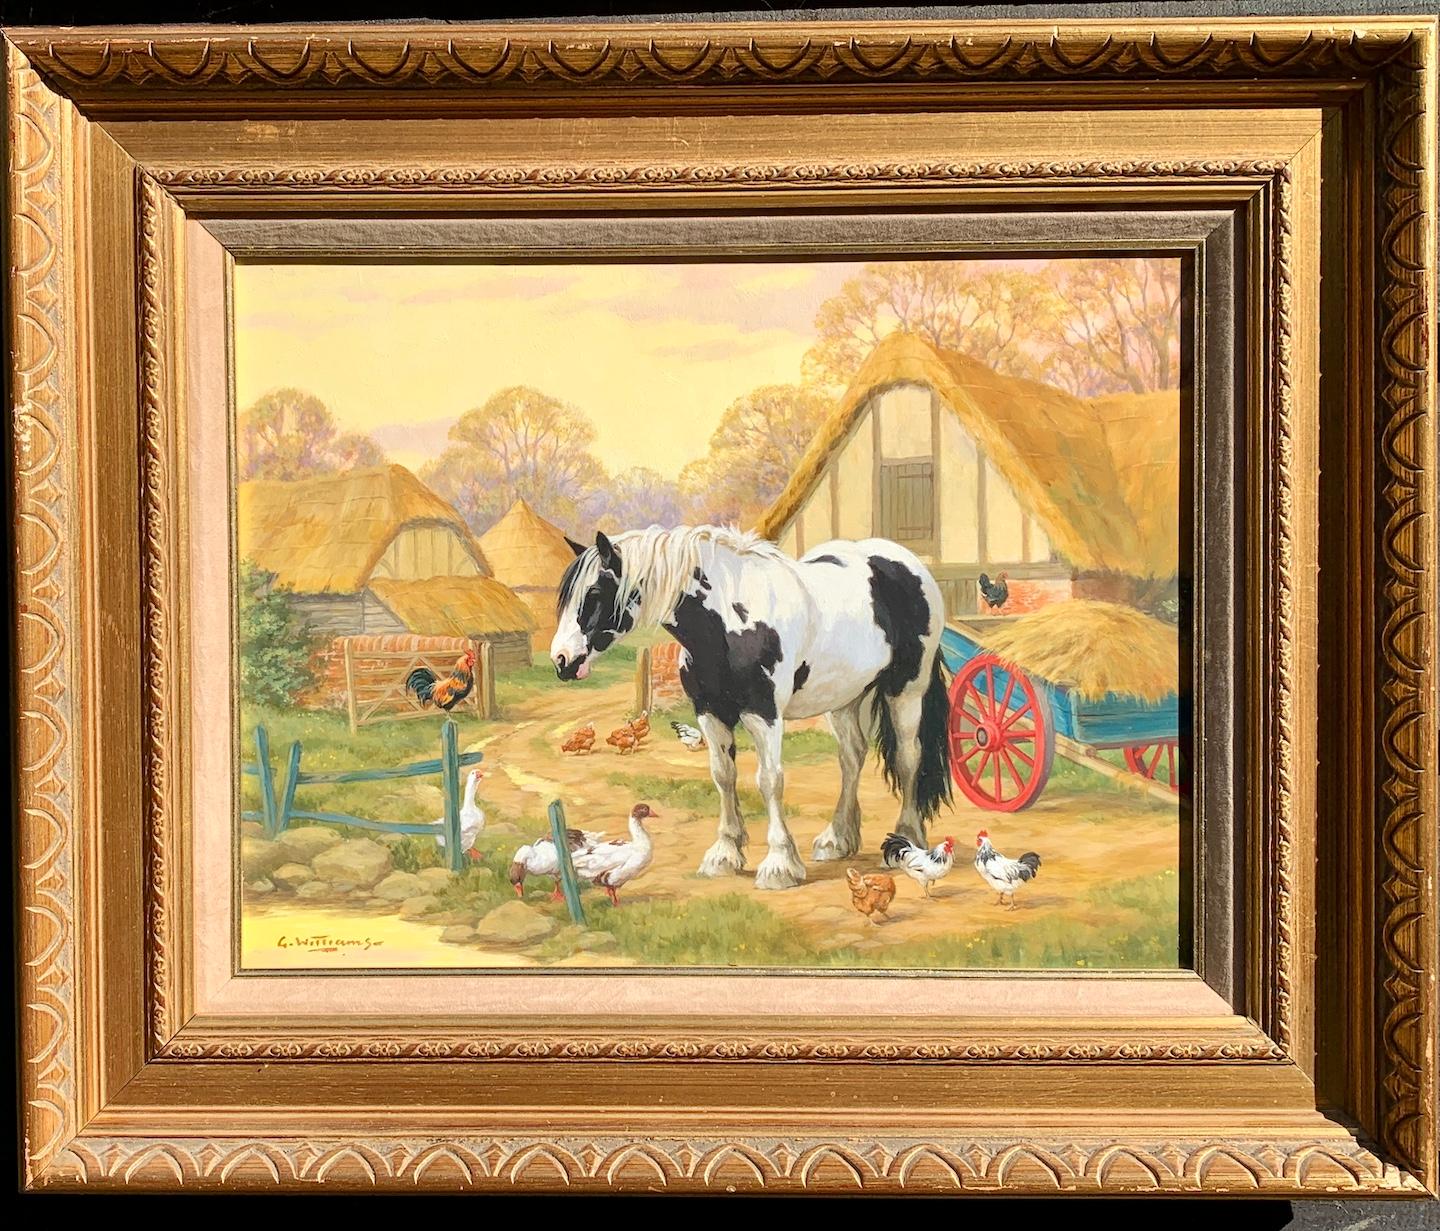 Glynn Williams Animal Painting - English Farm scene with a Shire horse, chickens, ducks and thatched cottage